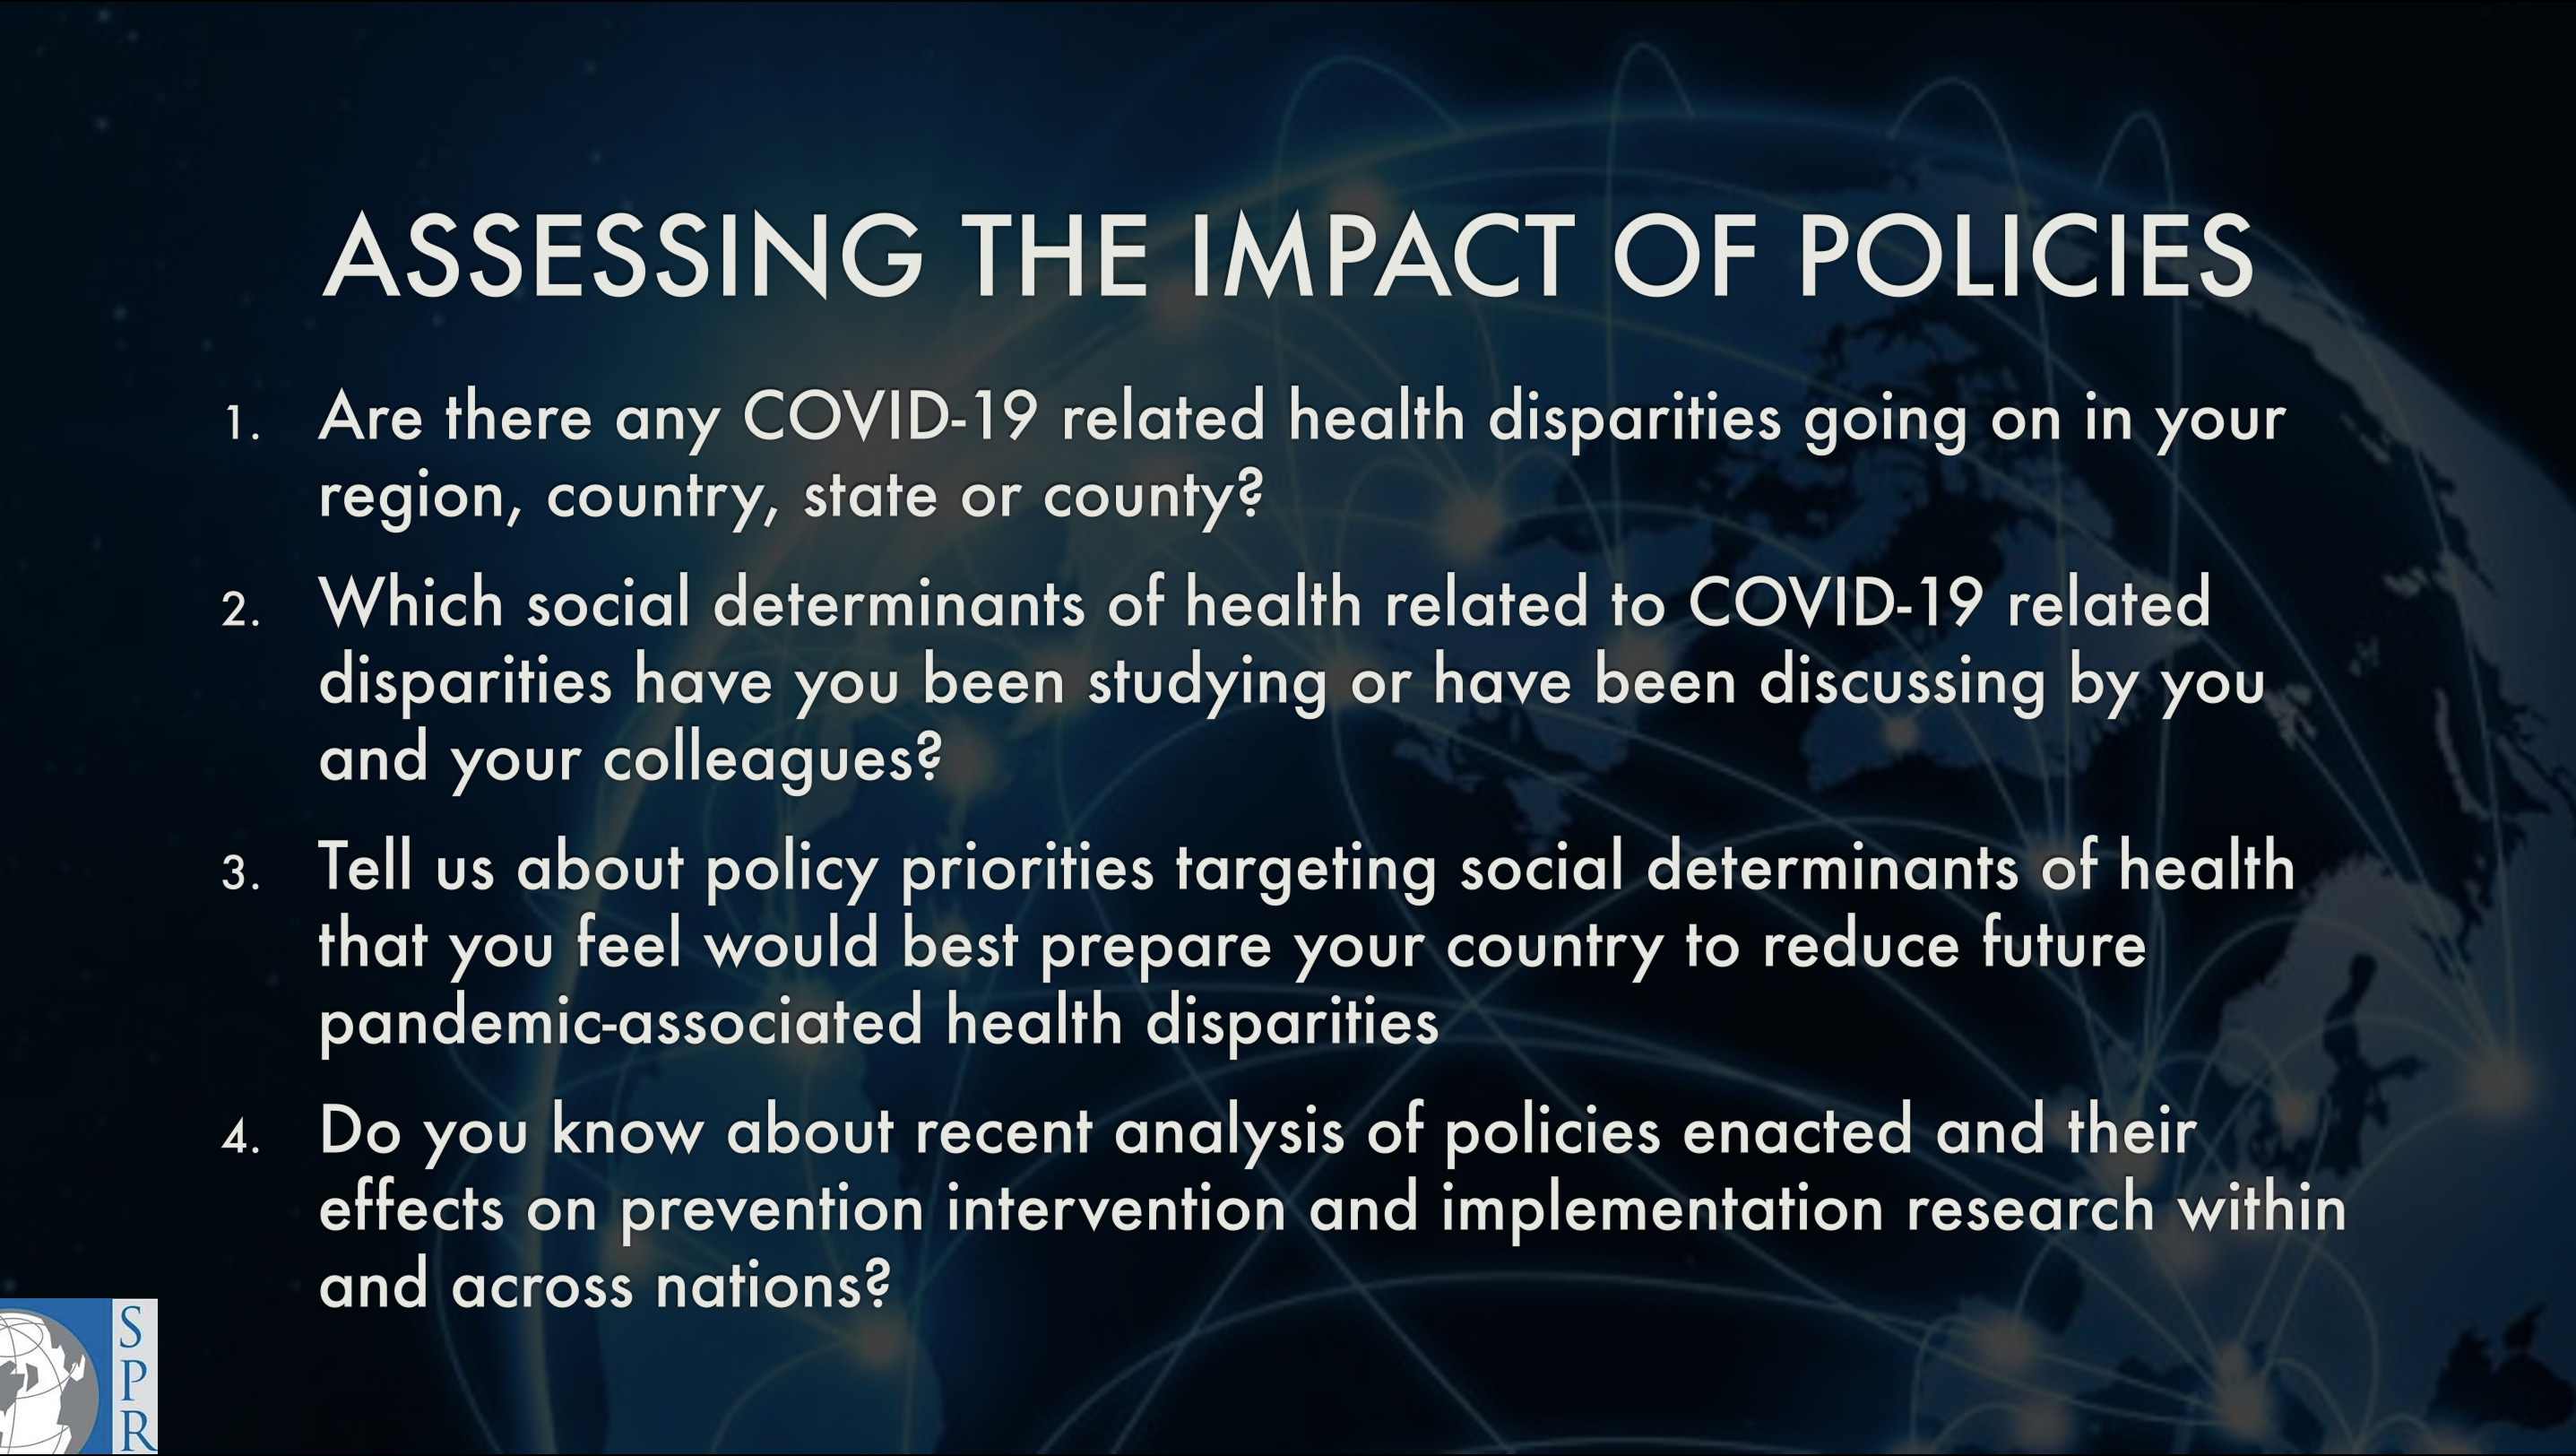 ASSESSING THE IMPACT OF POLICIES